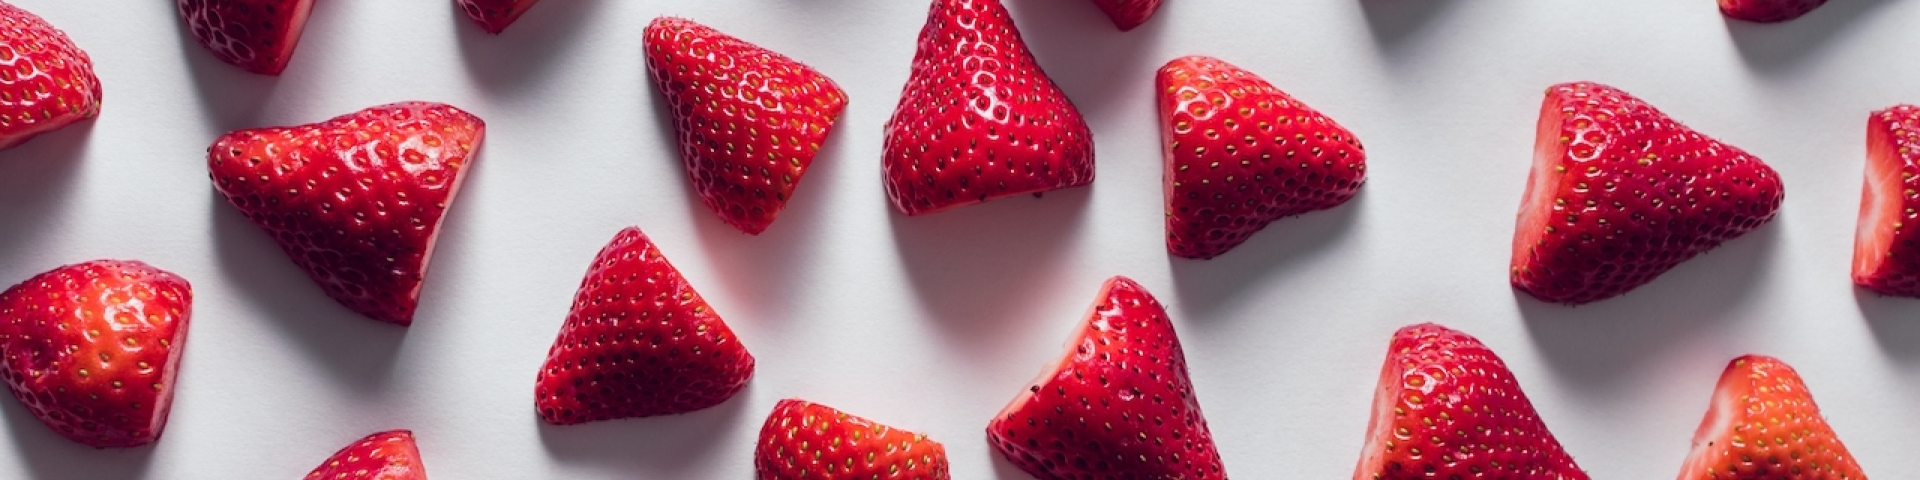 Several strawberries sliced in half to be used in a gut health smoothie.